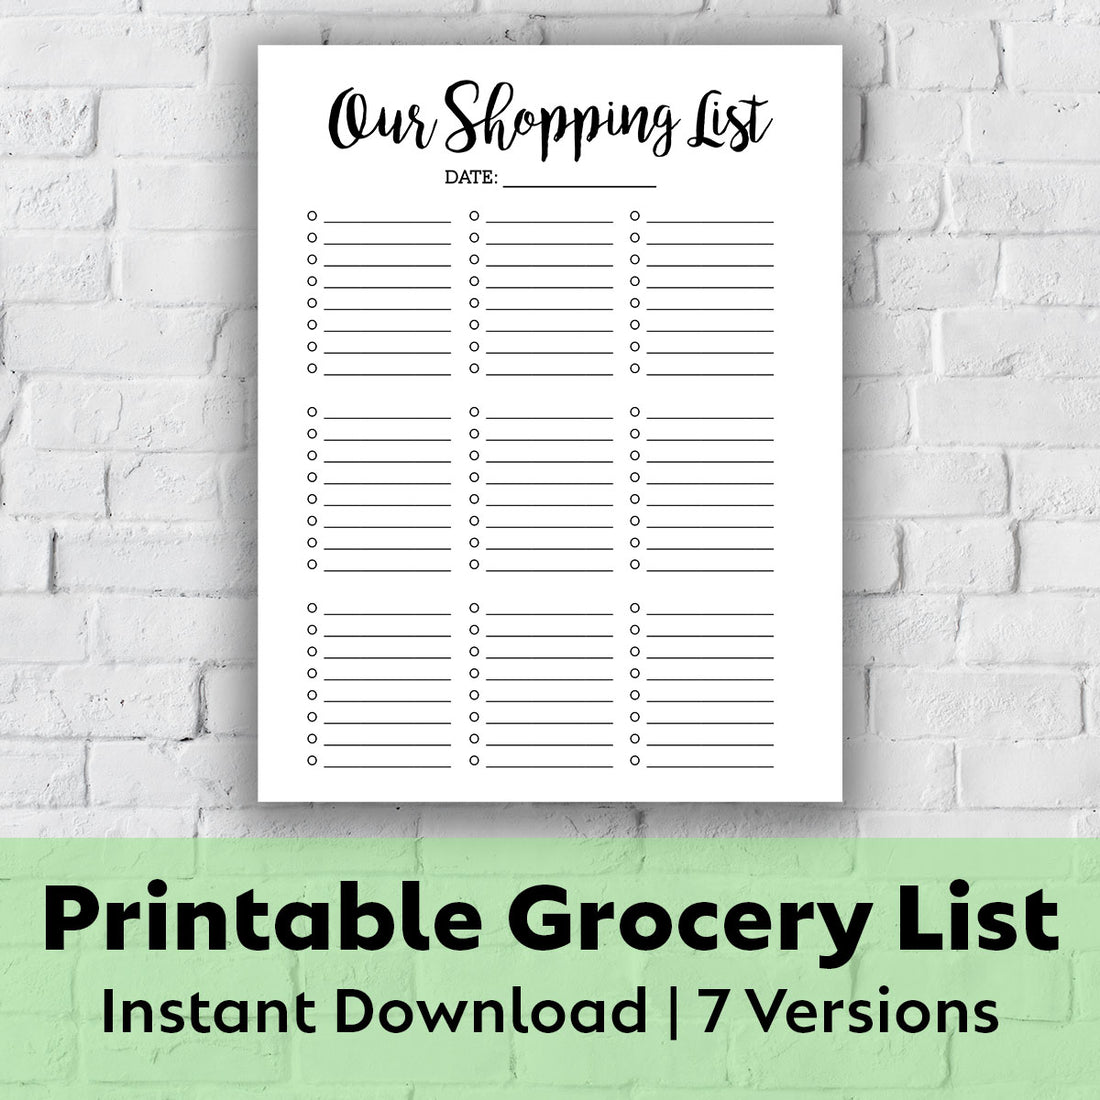 Printable Grocery List - Our Shopping List